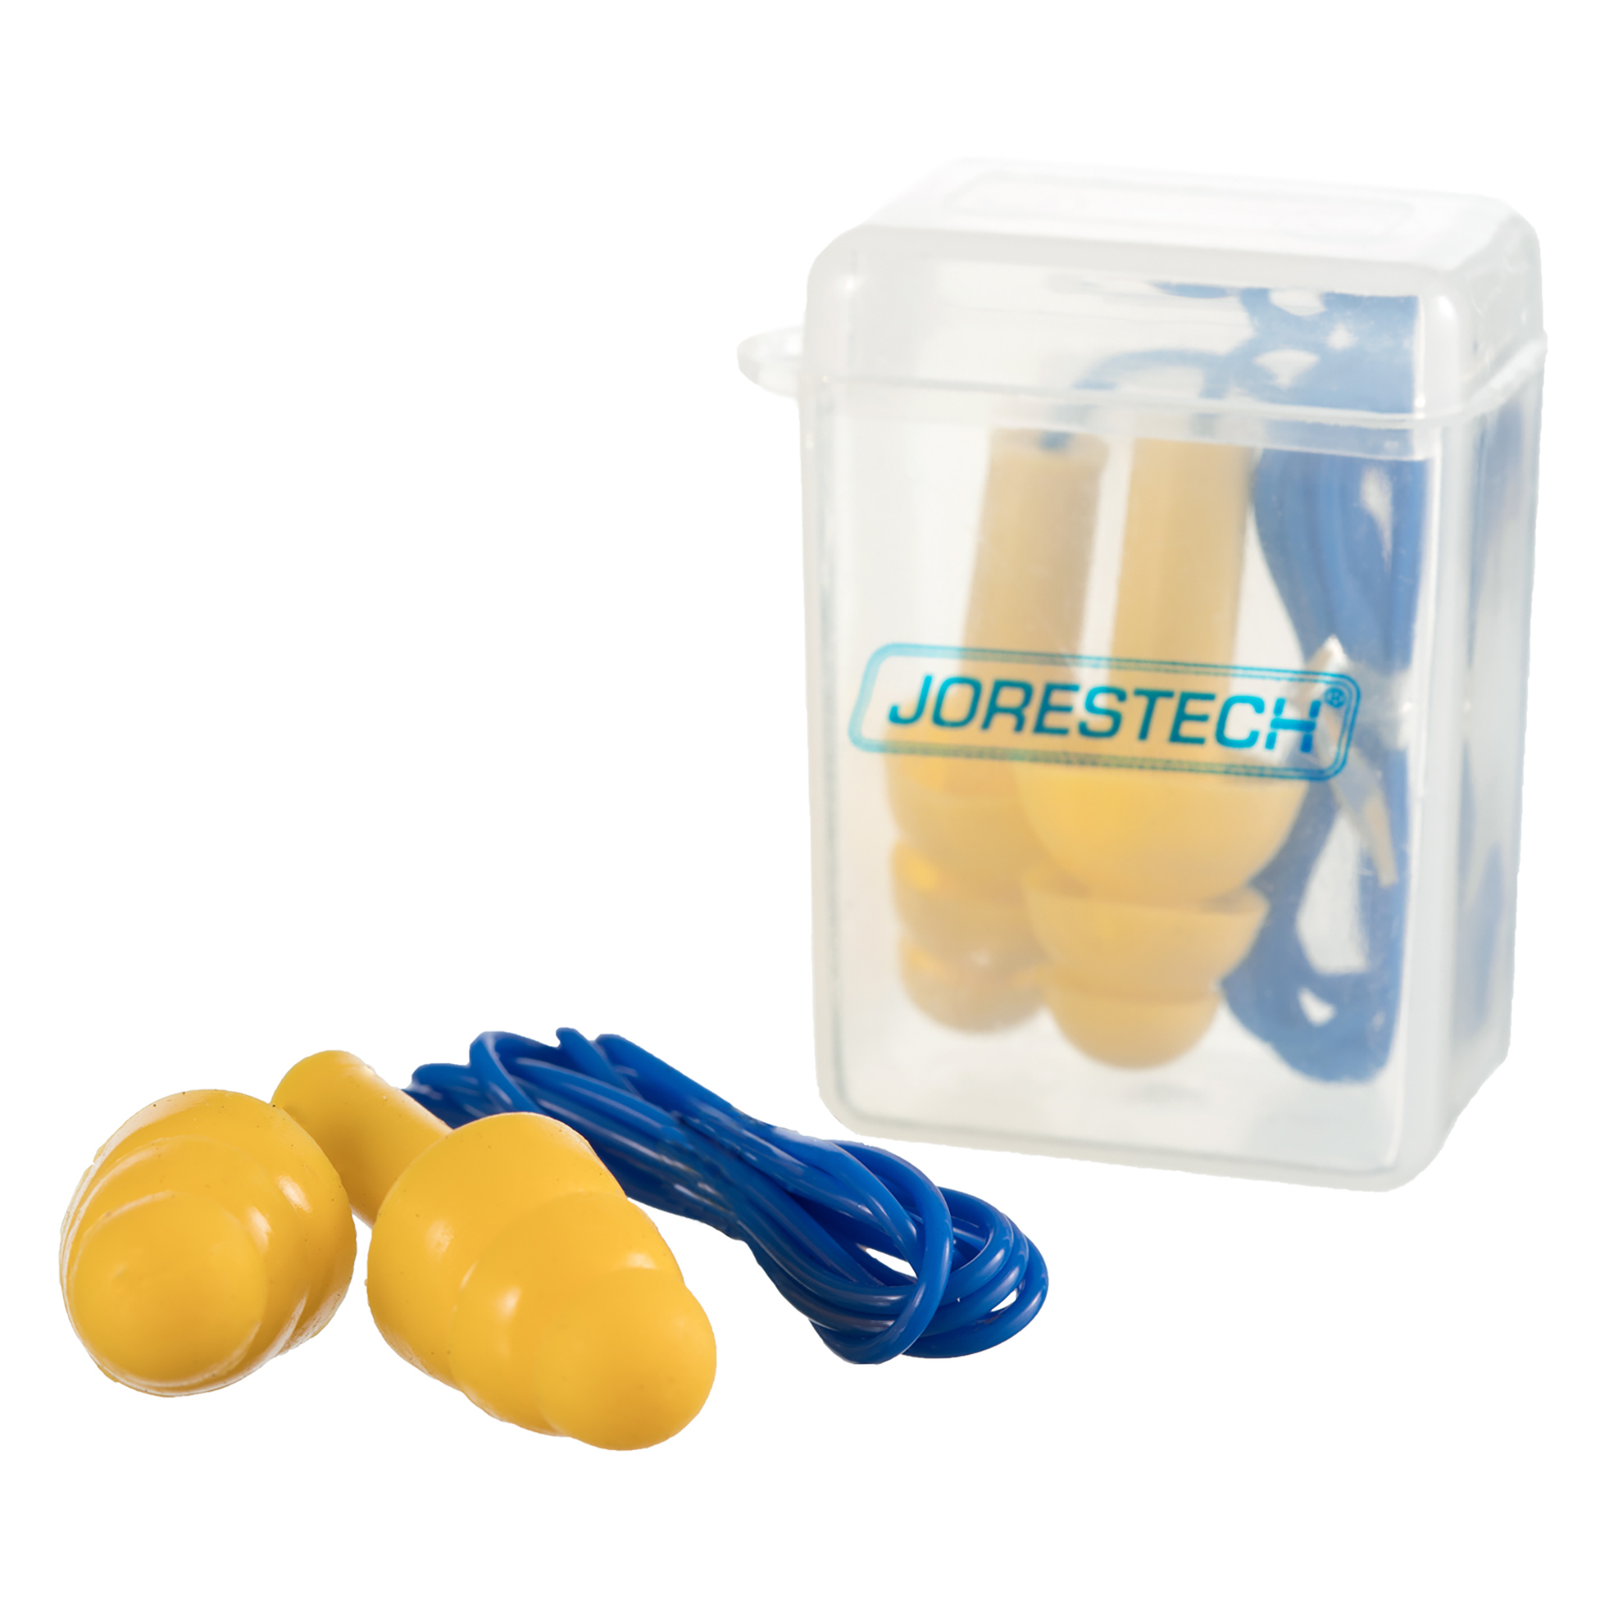 Shows one set of silicone tri flange corded JORESTECH® earplug inside a carry on container of plastic, and another earplug set in front with bright blue and yellow colors